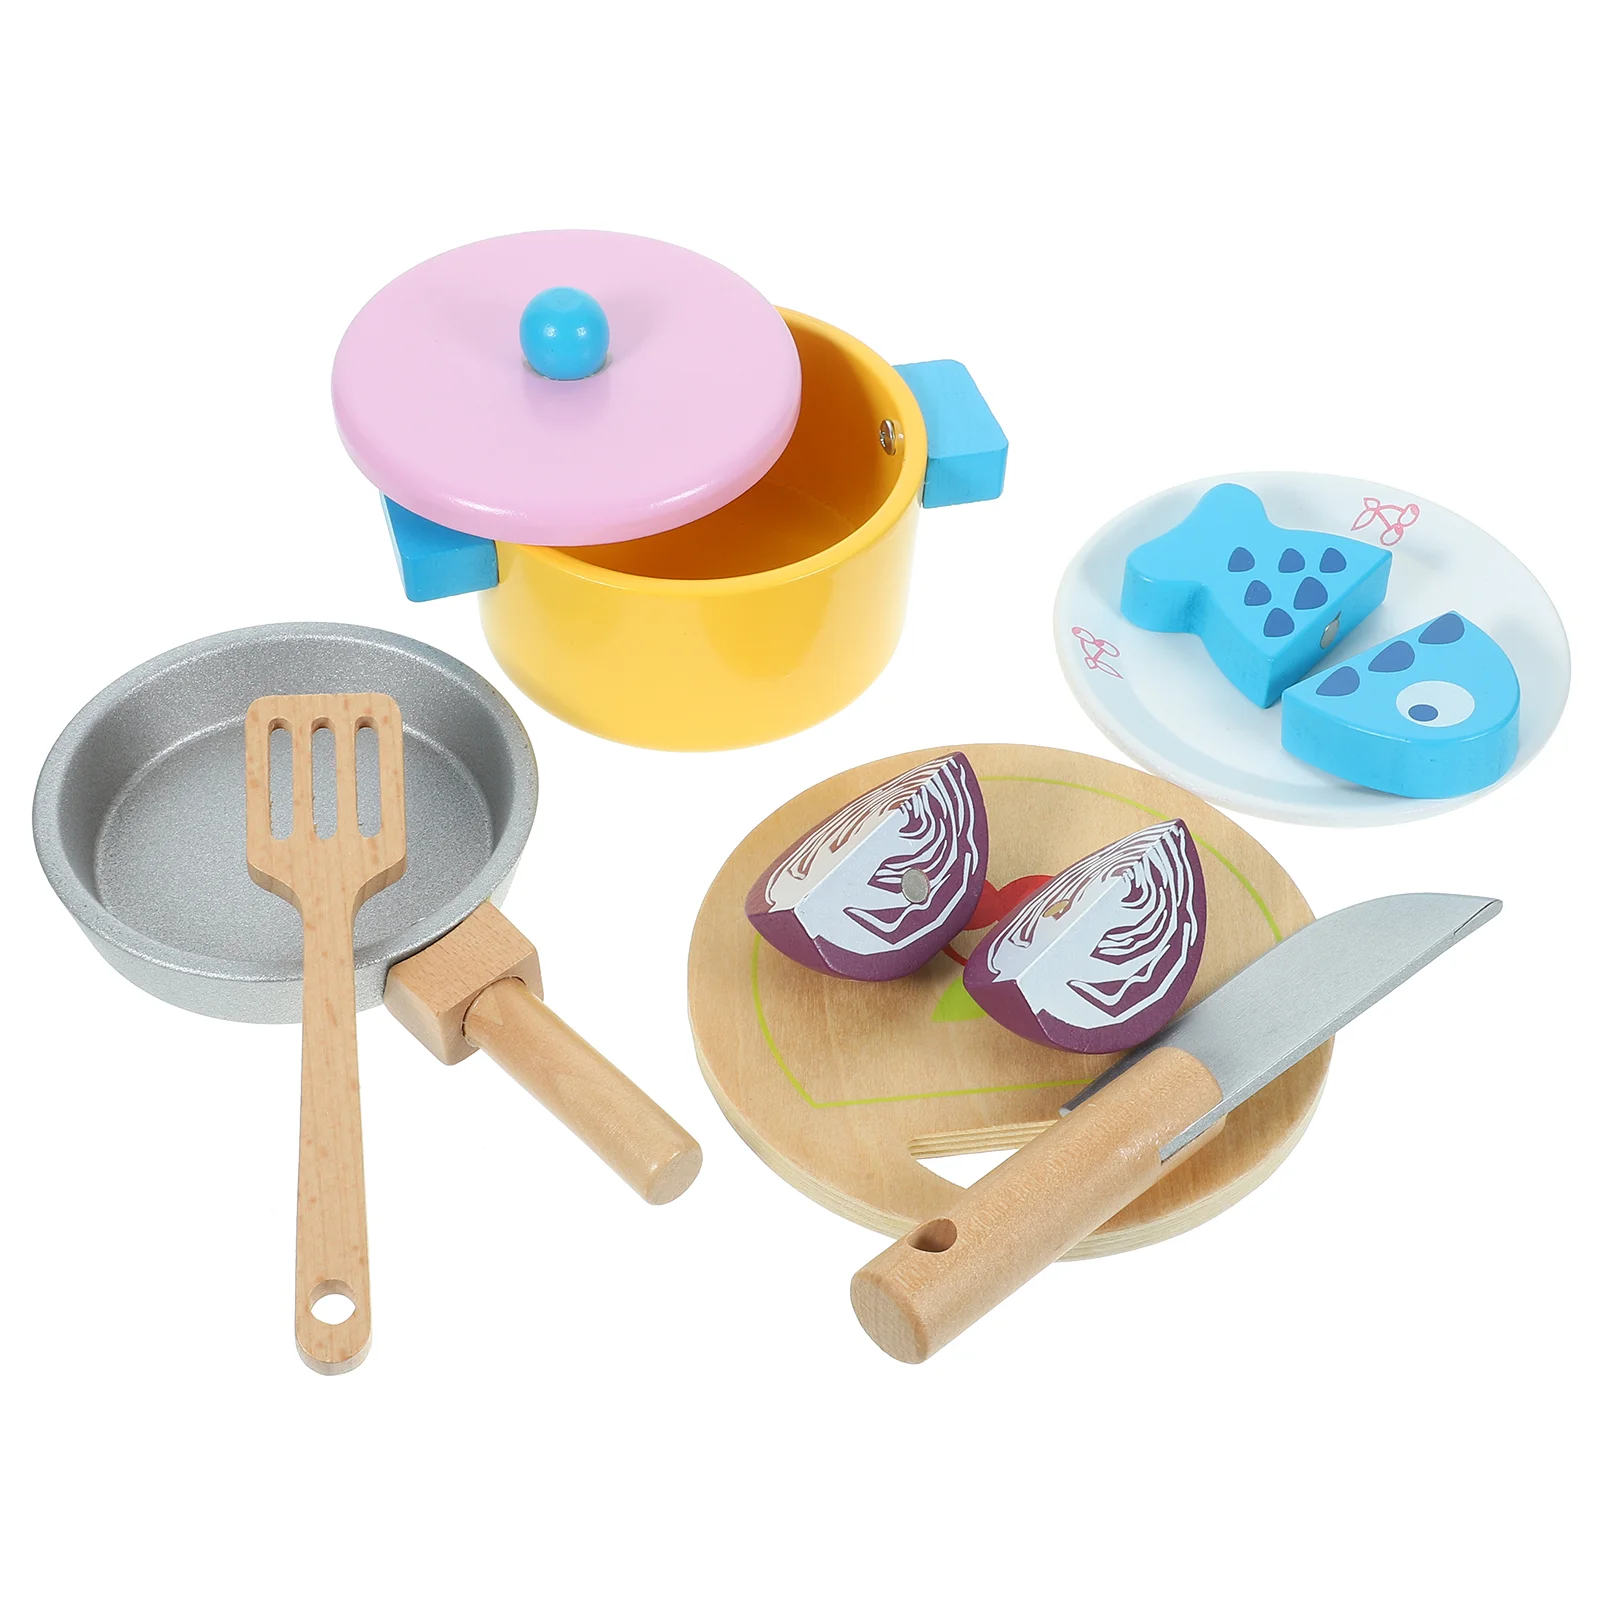 

Kitchen Toys Kids Suit Cooking Educational Playthings Children Gift Simulation Wooden Playing House Cookware Playset